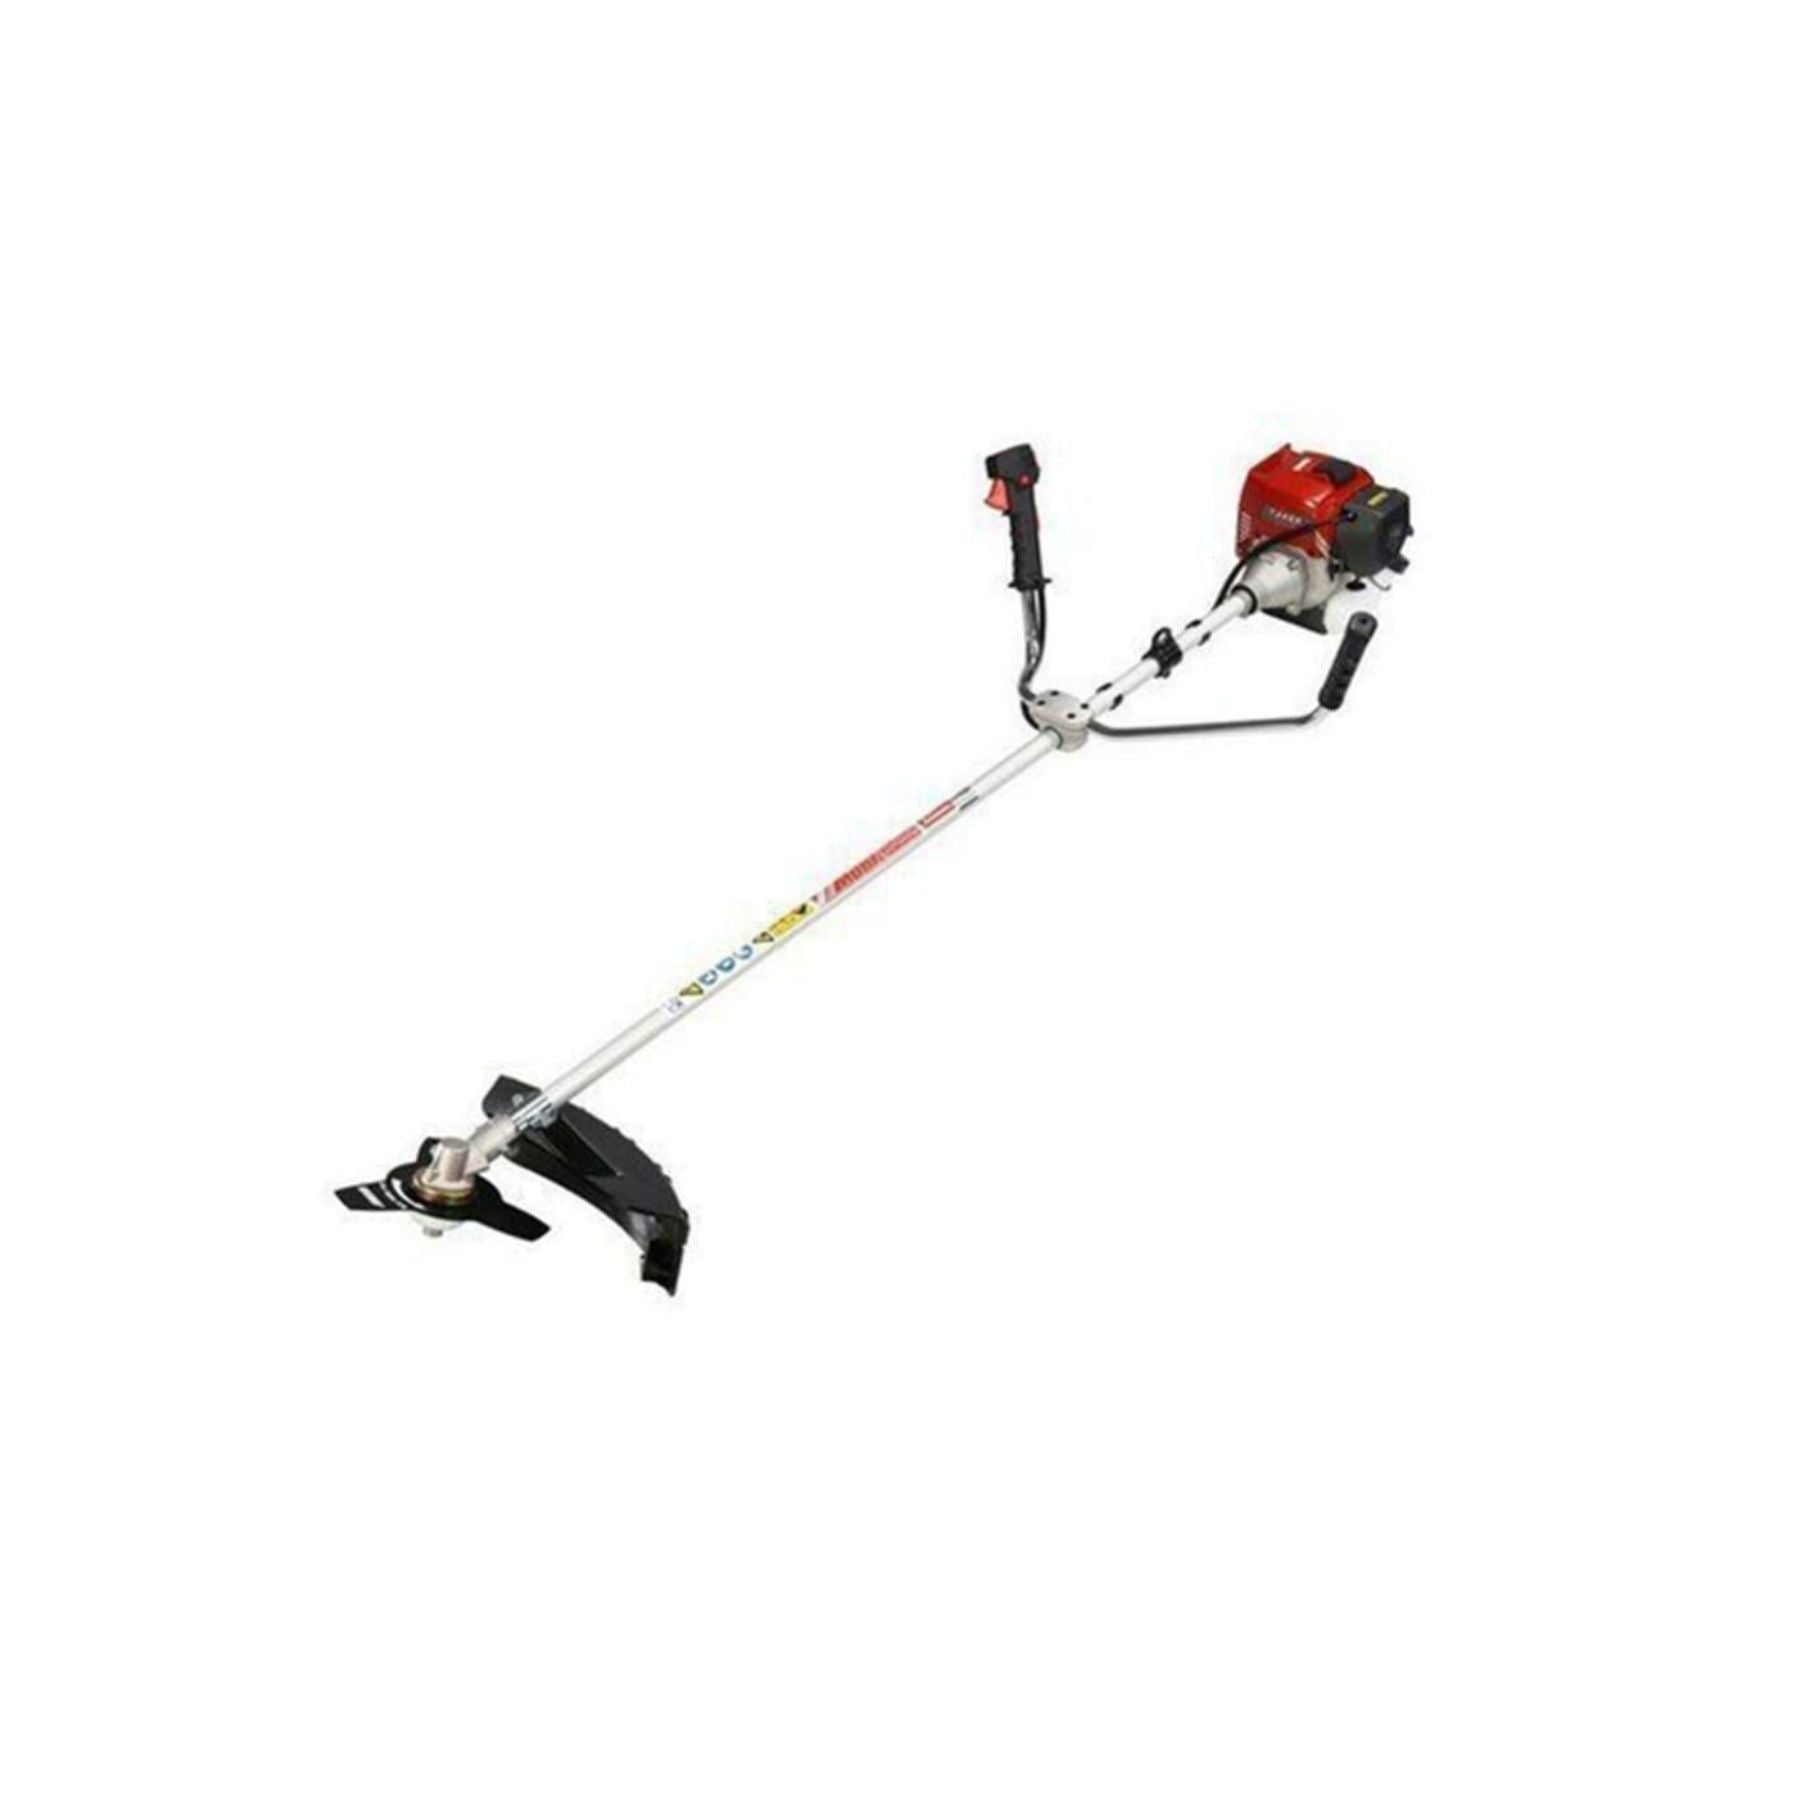 Rover Back Pack Brush Cutter RB 933